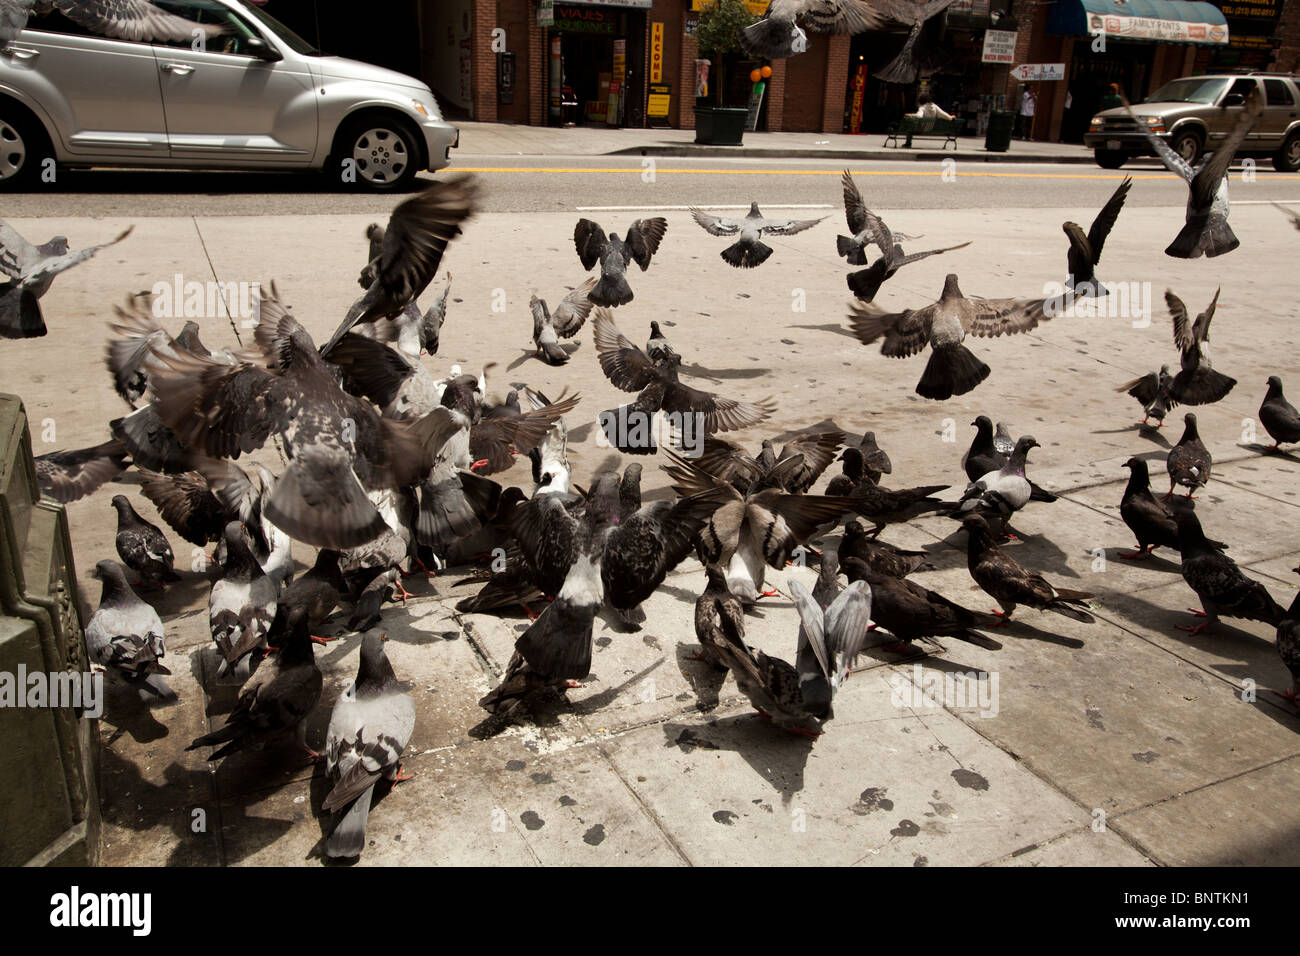 pigeions on Broadway, Los Angeles, California, United States of America Stock Photo